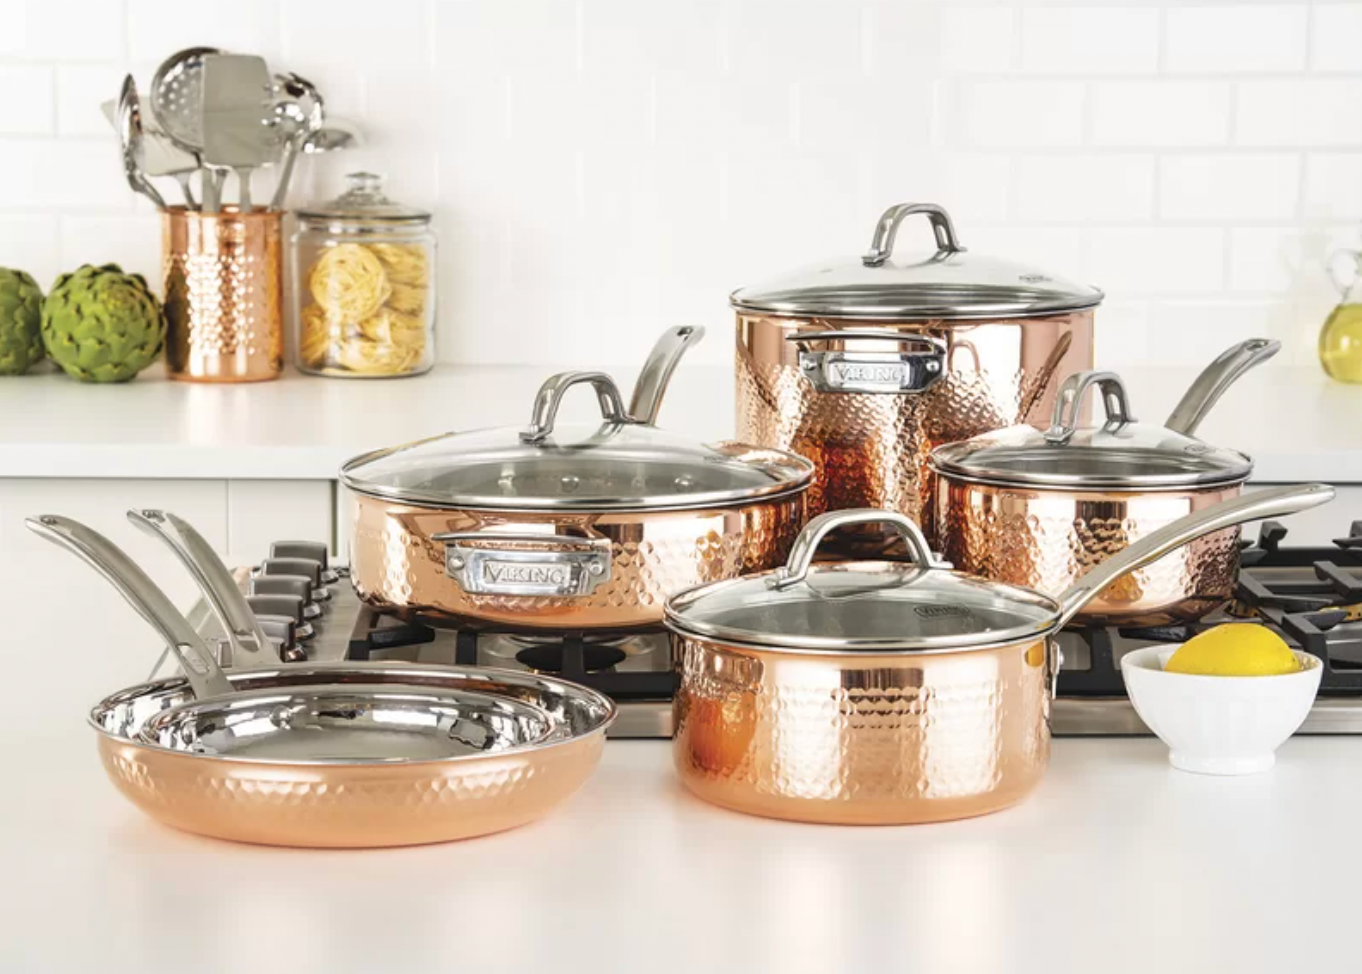 Viking Hammered Copper Clad 10 Piece Cookware Set